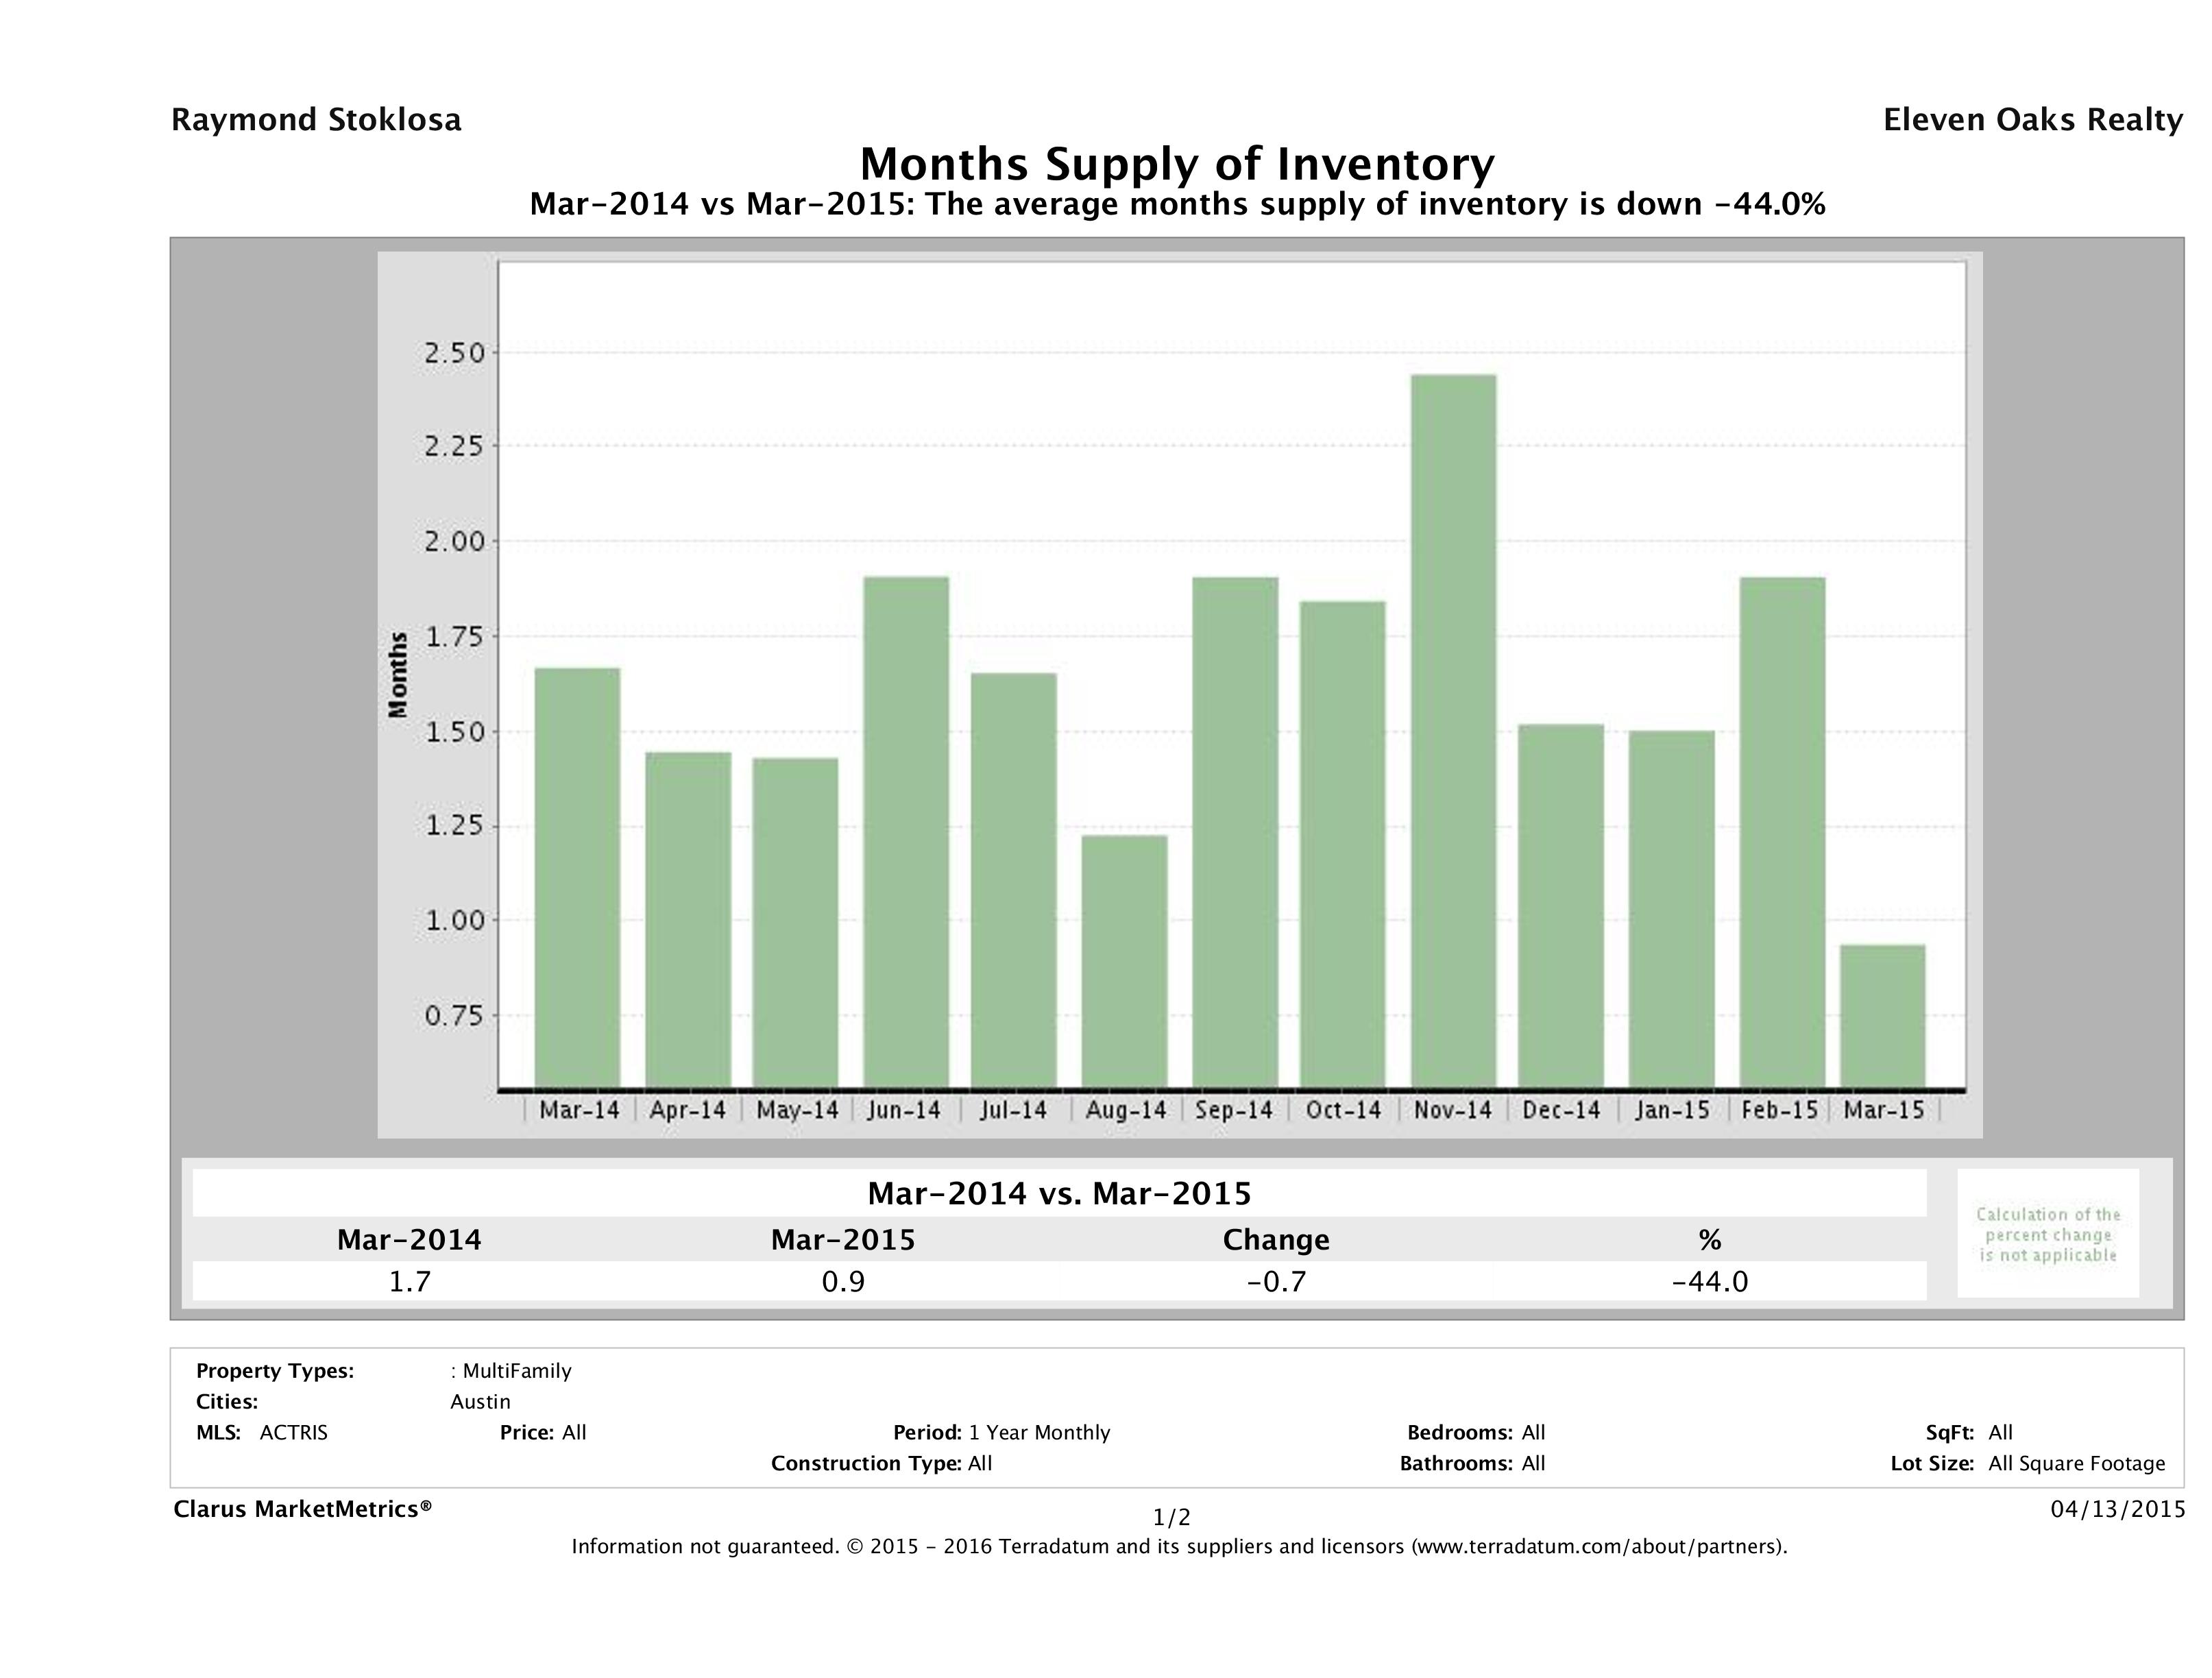 Austin multi family months inventory March 2015